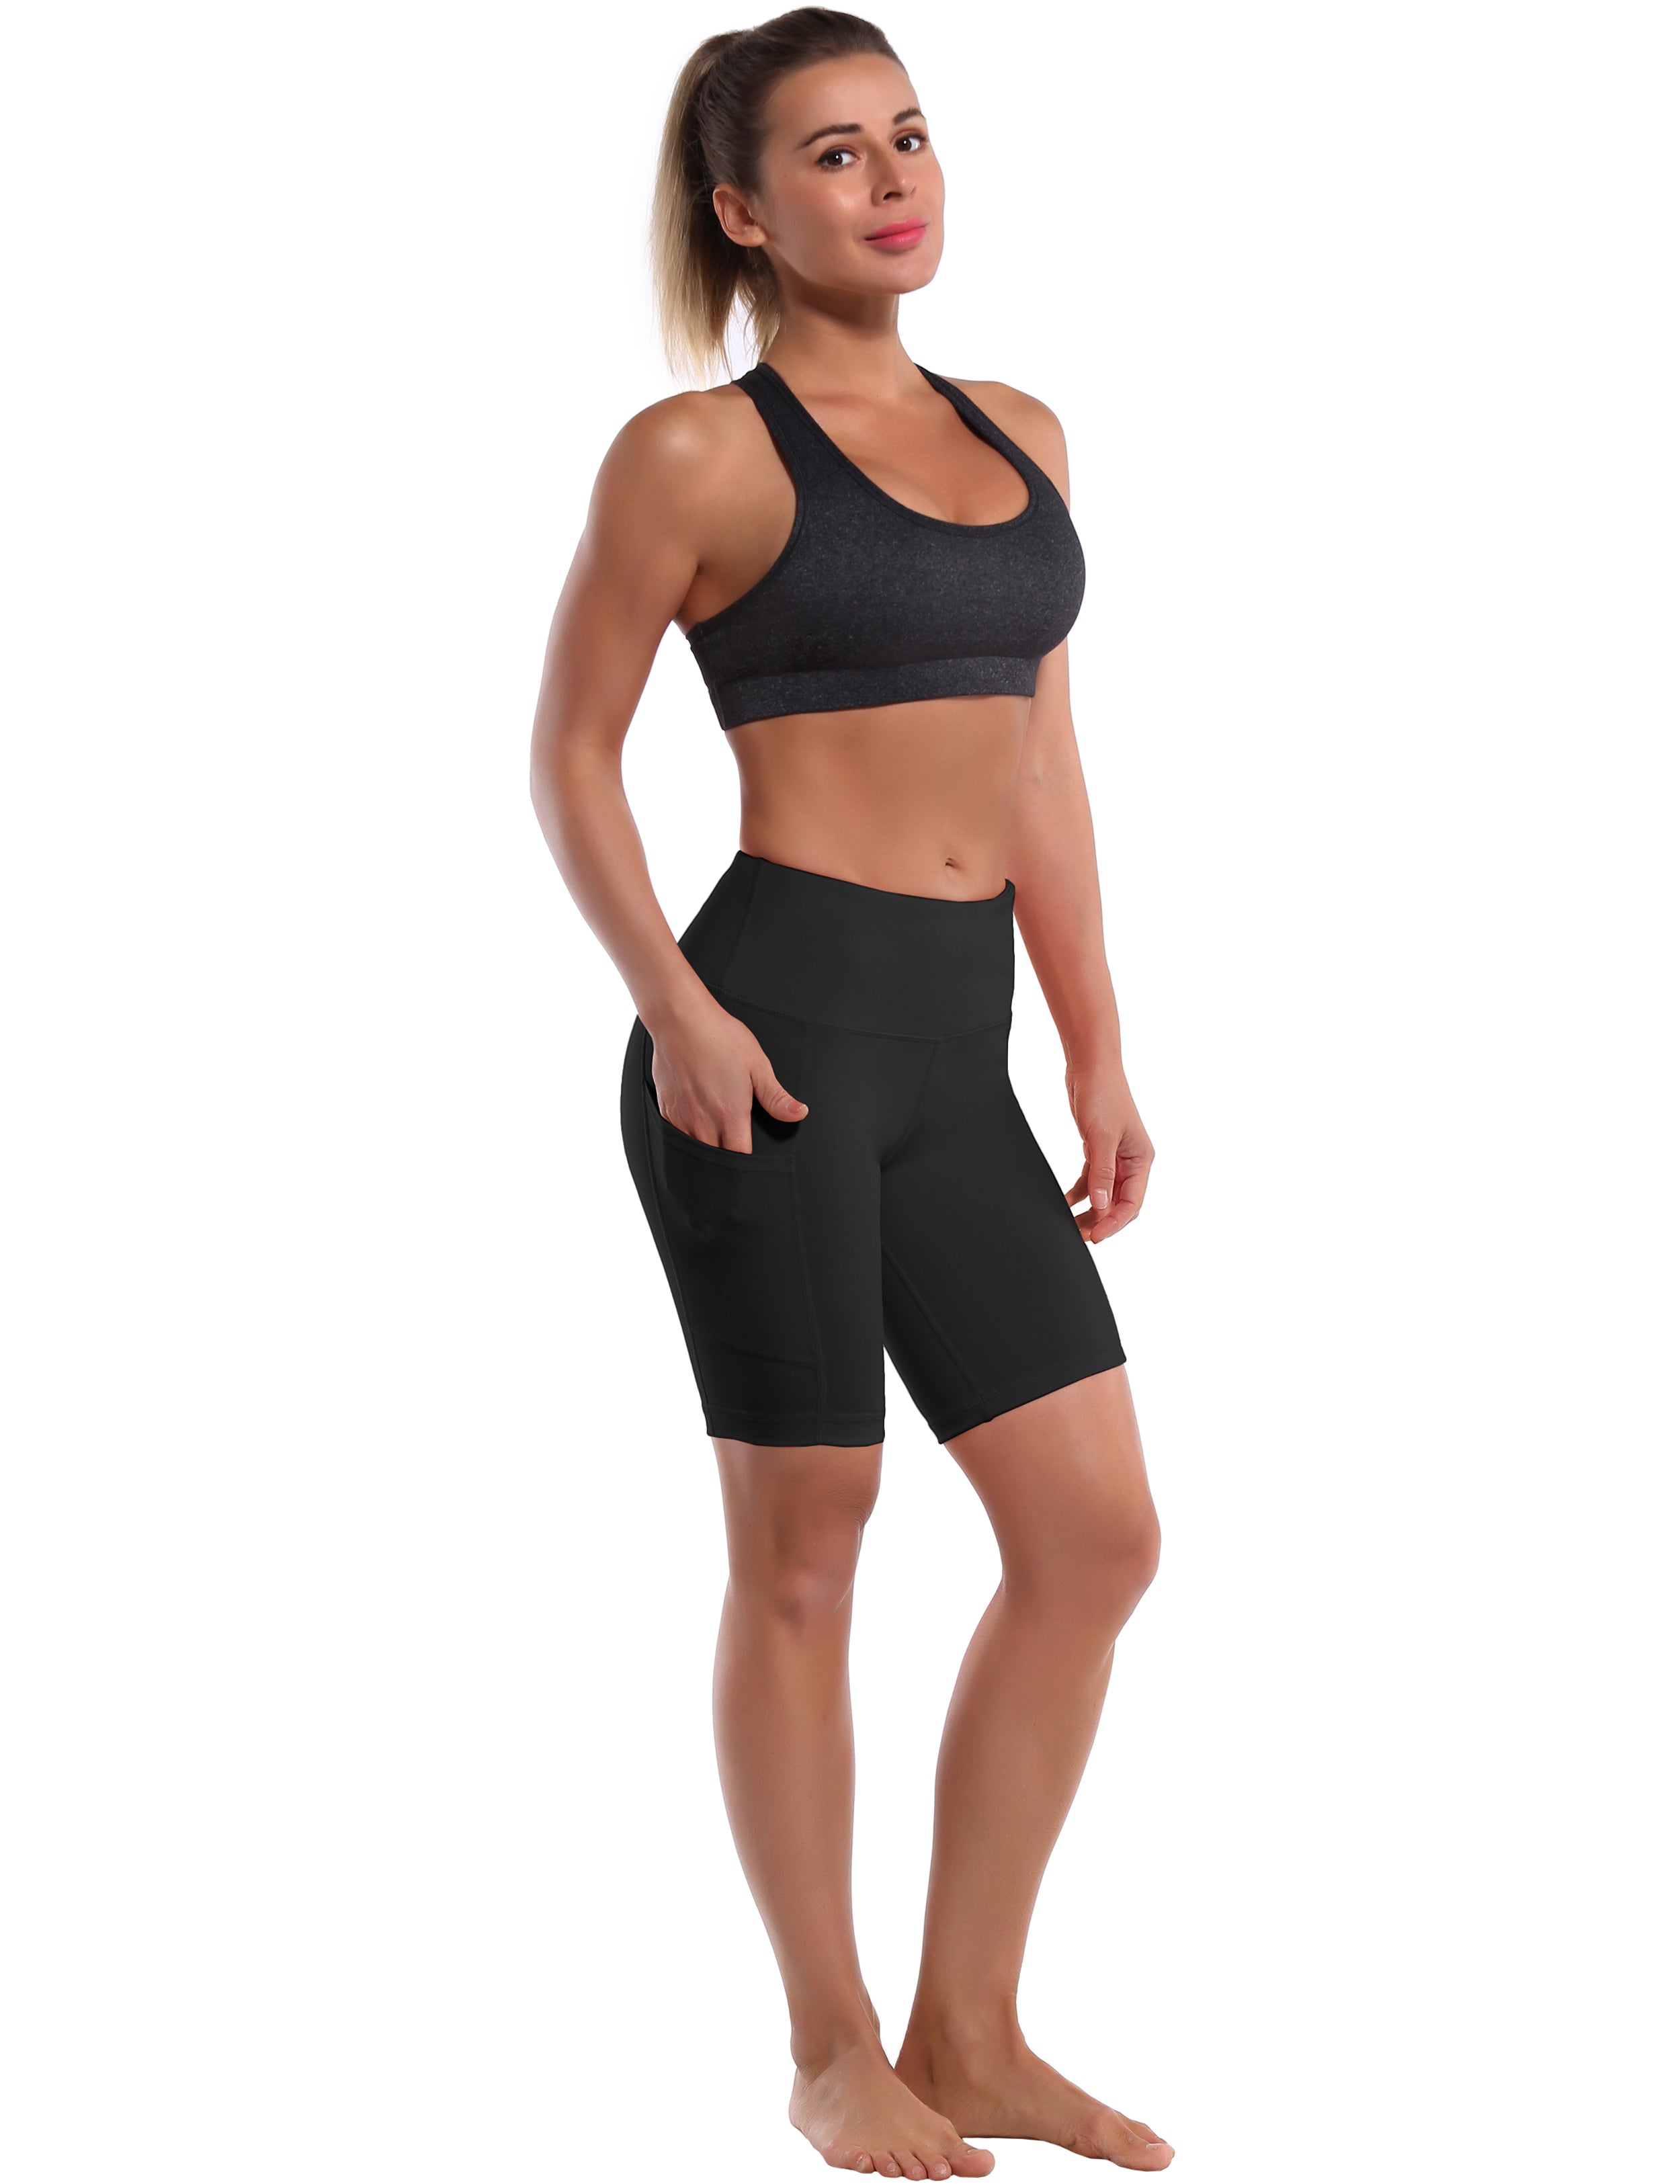 8" Side Pockets Pilates Shorts black Sleek, soft, smooth and totally comfortable: our newest style is here. Softest-ever fabric High elasticity High density 4-way stretch Fabric doesn't attract lint easily No see-through Moisture-wicking Machine wash 75% Nylon, 25% Spandex